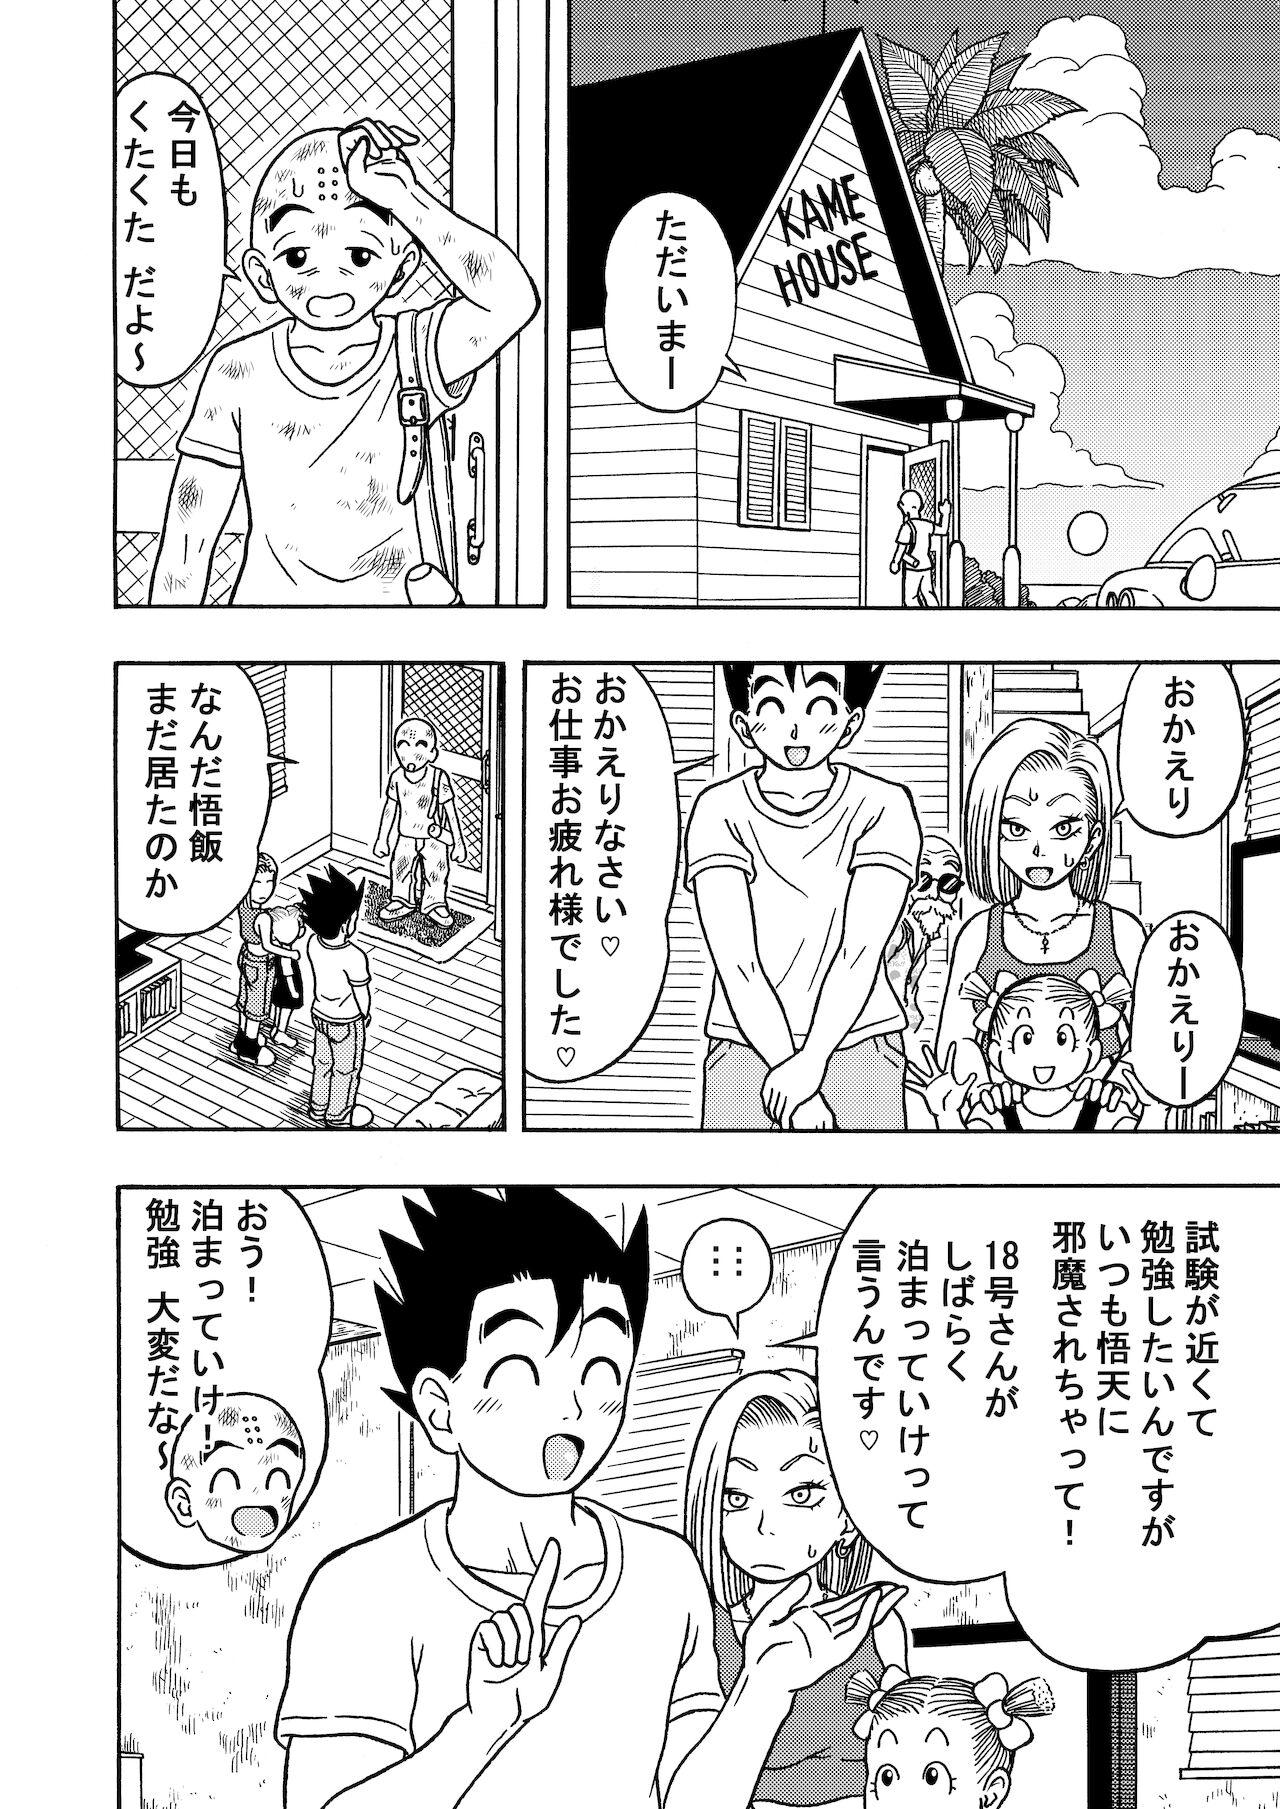 Shaven 18's NTR pies on parade 2 - Dragon ball z Gay Big Cock - Page 12